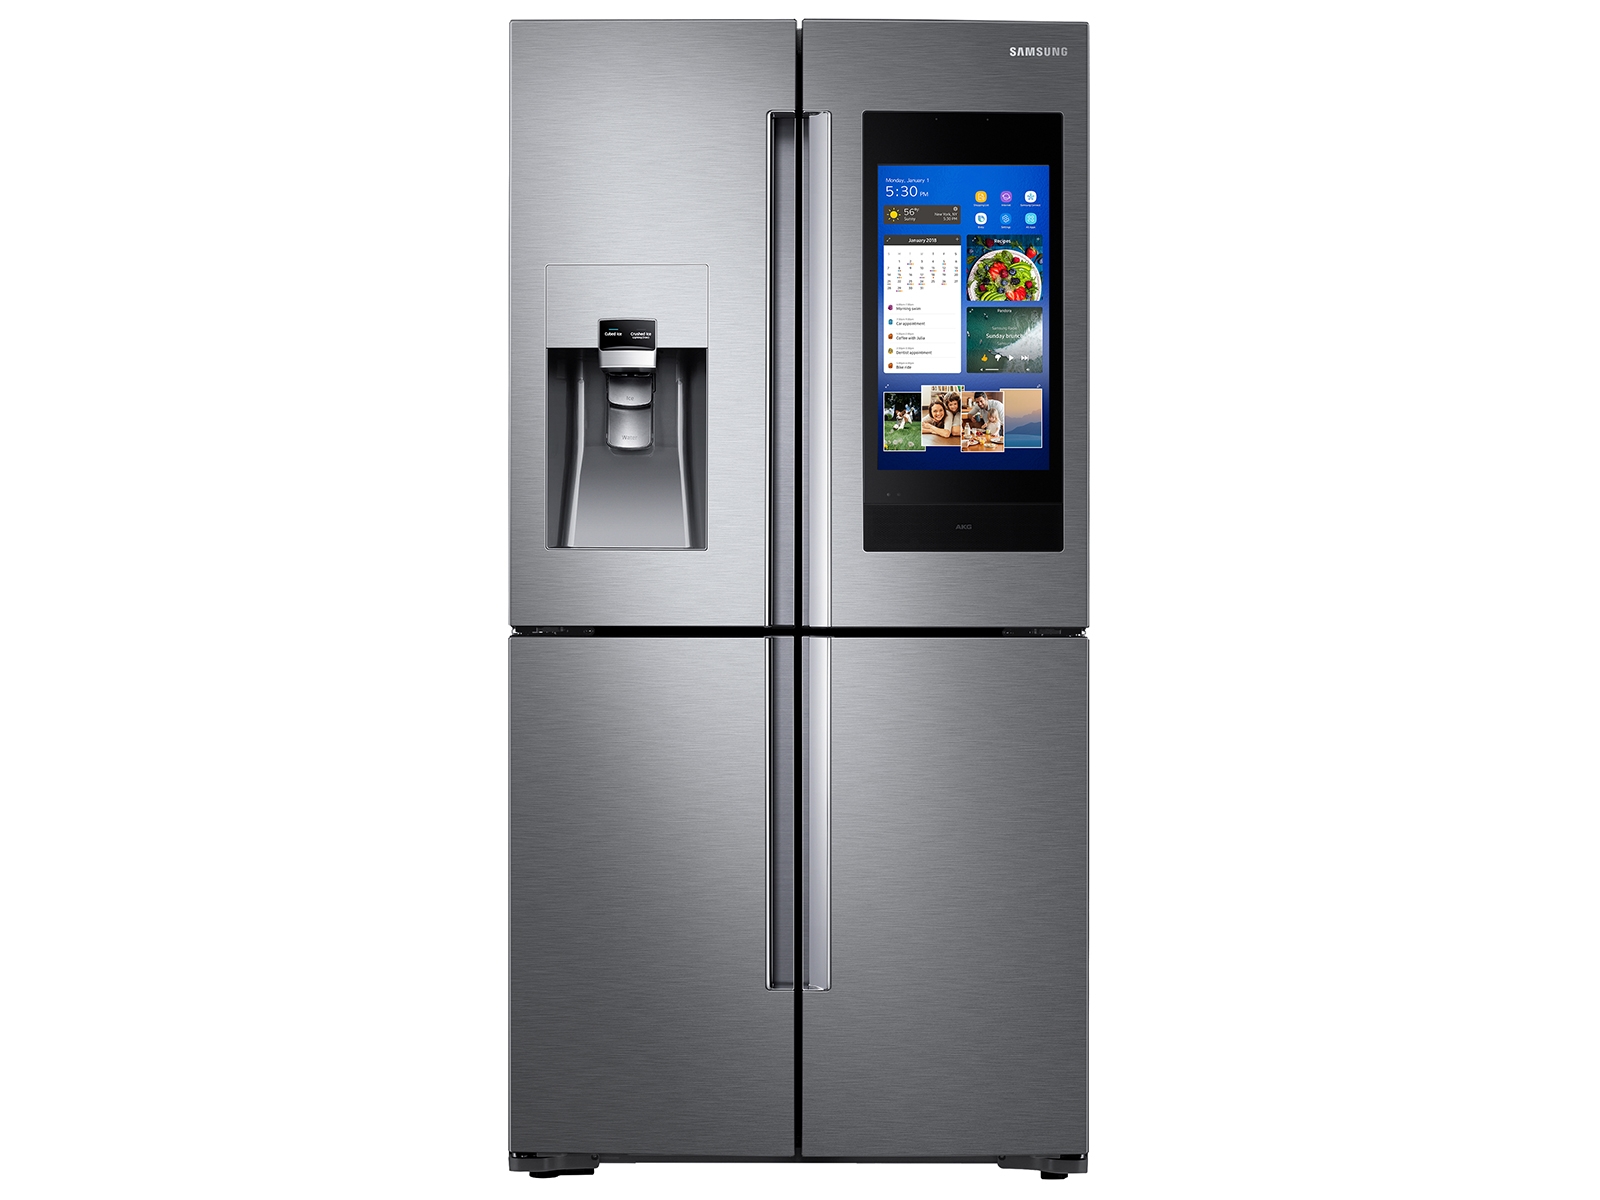 Samsung RF28K9380SG 4-Door Flex Food Showcase Refrigerator review: High-end  looks and powerful performance from this four-door fridge - CNET